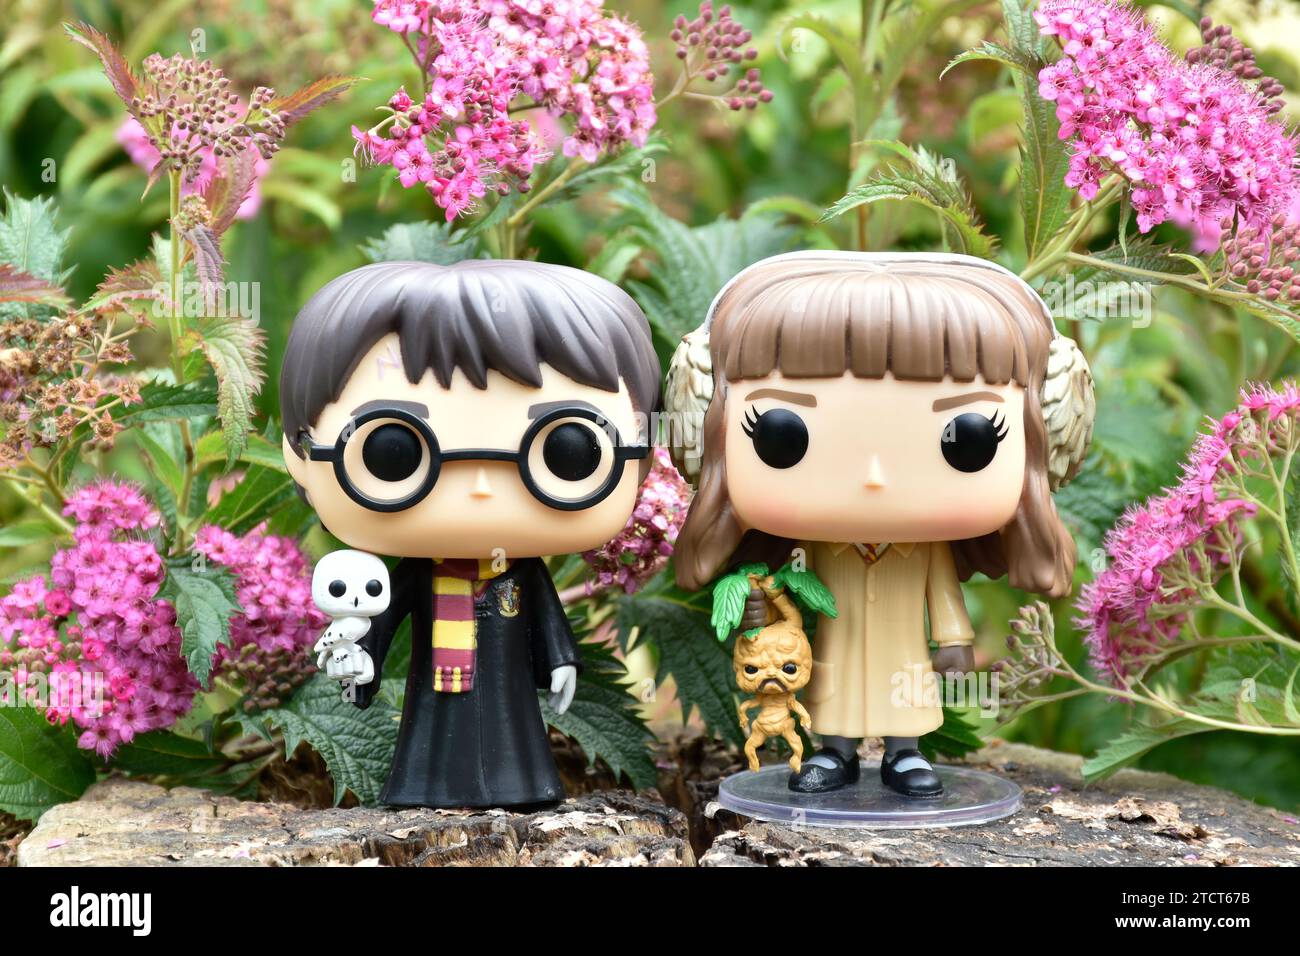 Funko Pop action figures of Harry Potter and Hermione Granger. Pink flowers, forest glade, magical woods, wizarding world, friendship. Stock Photo